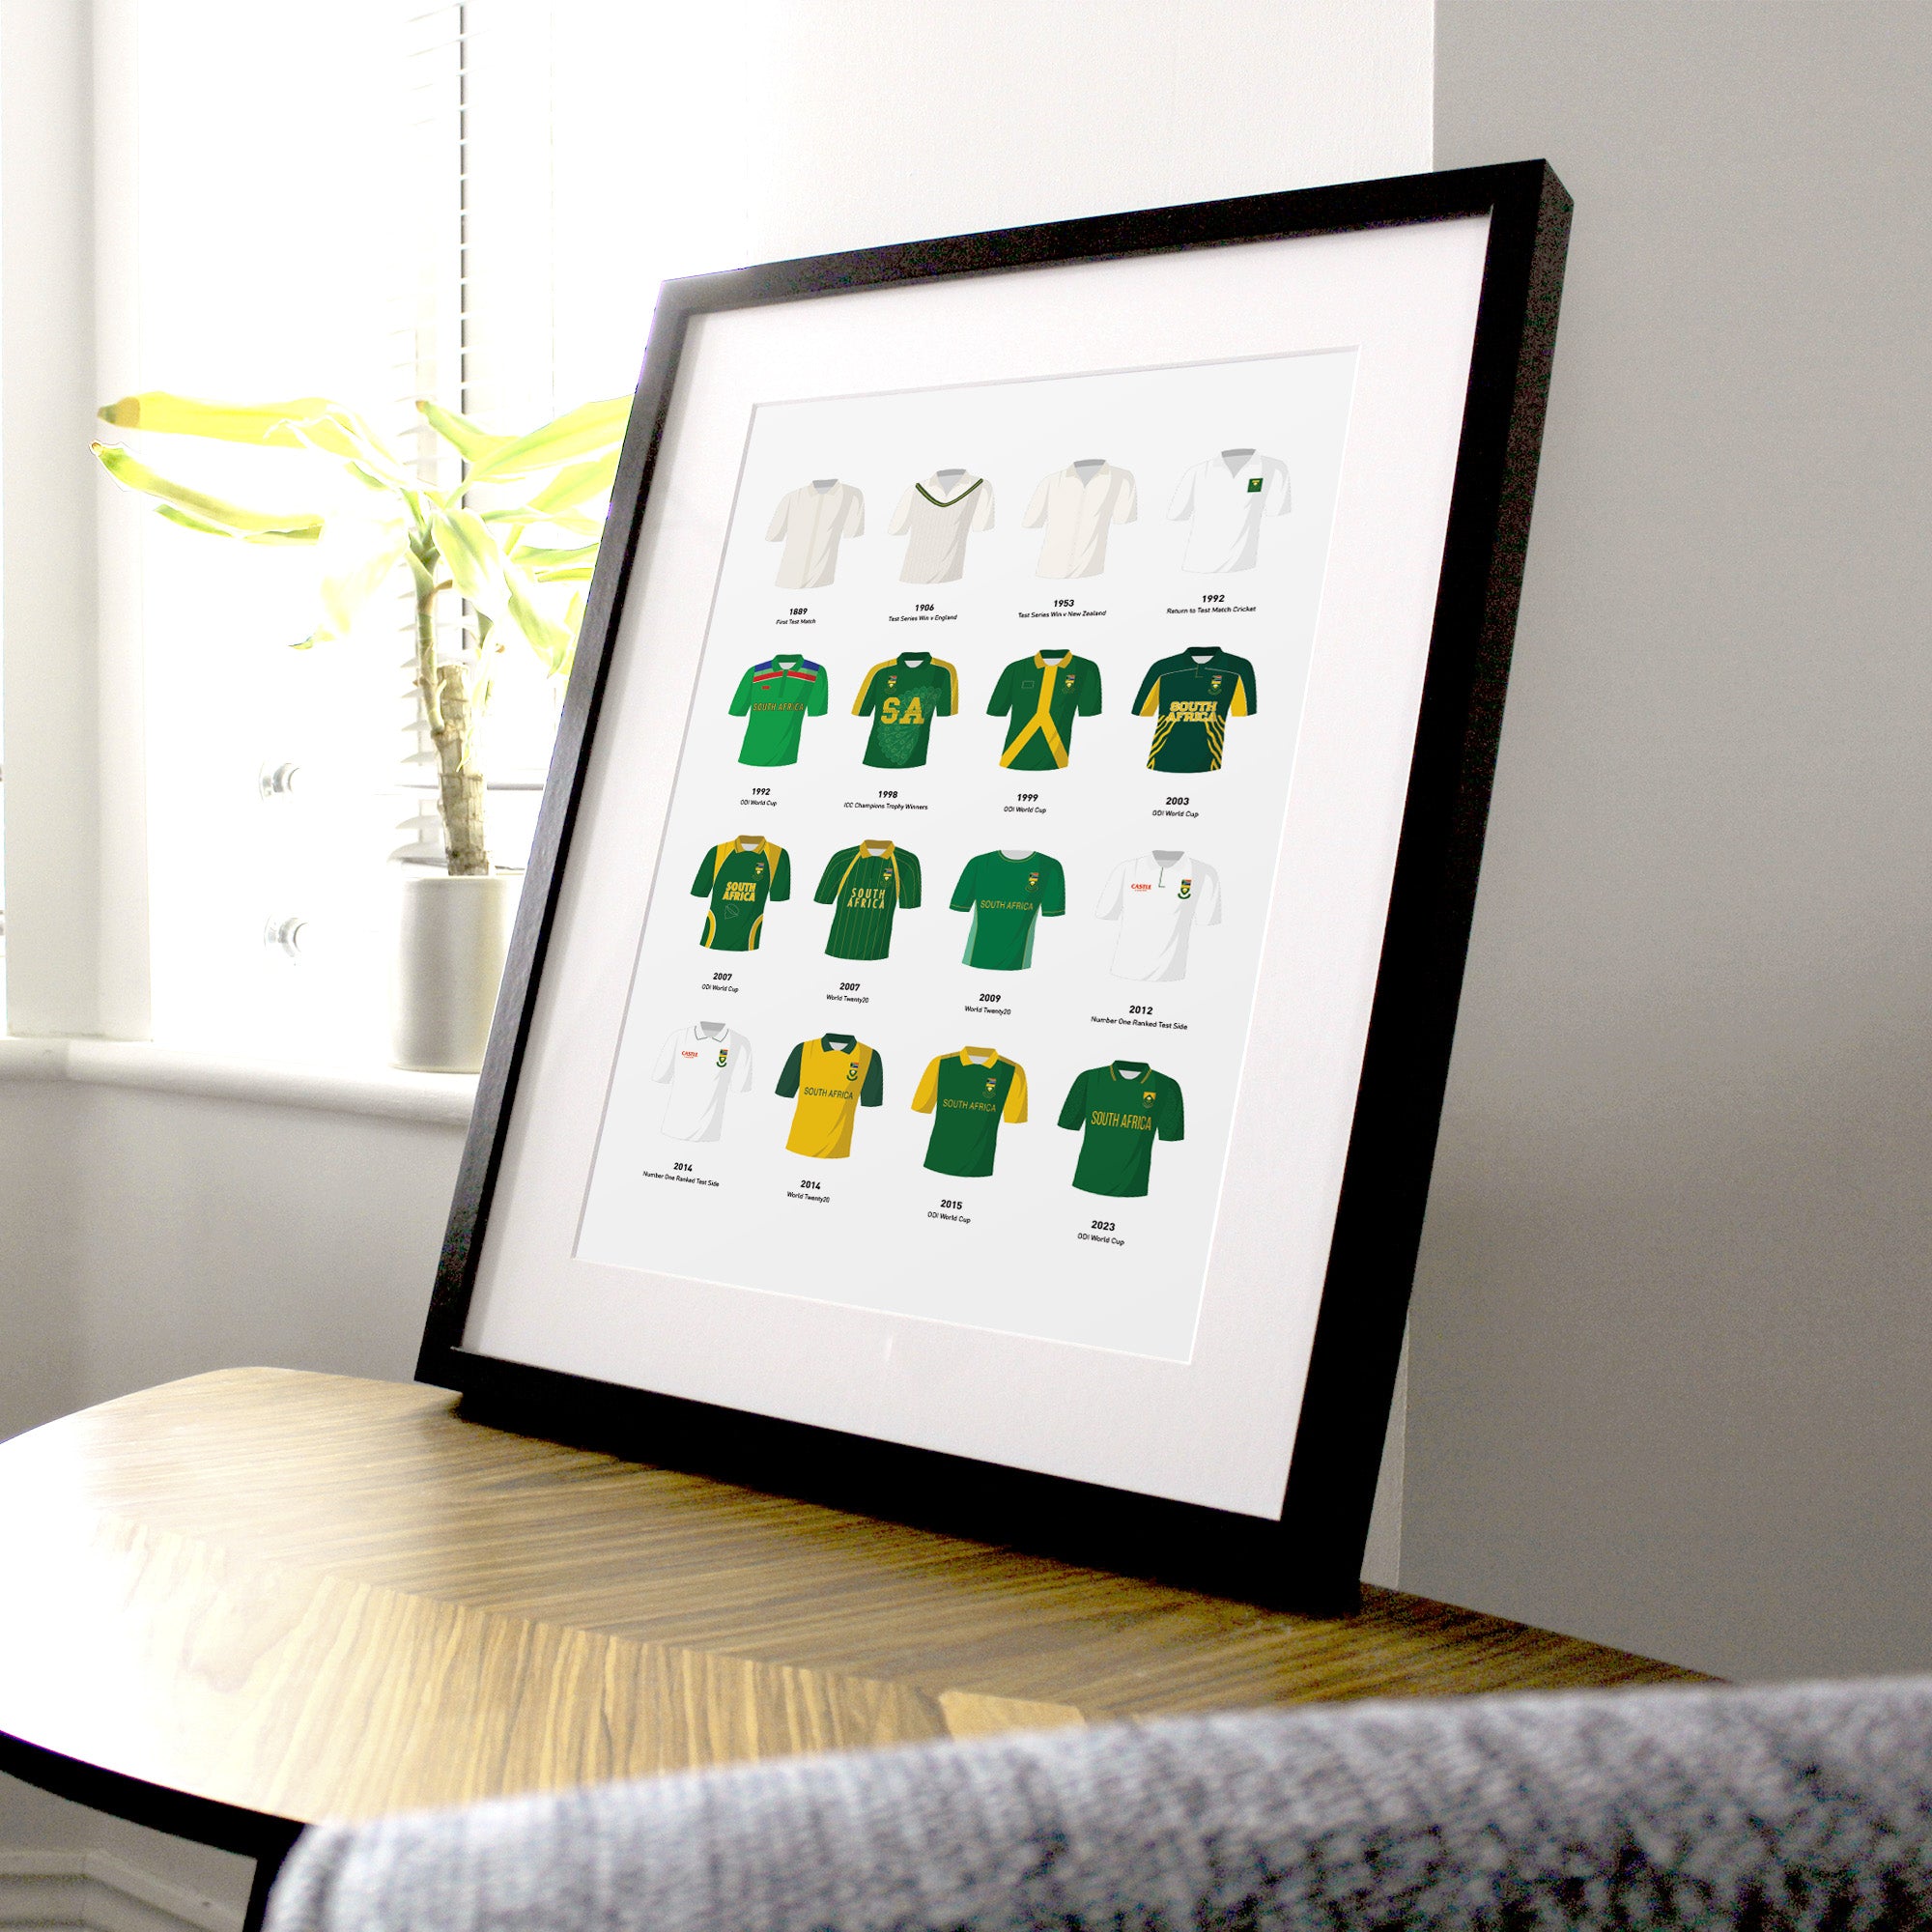 South Africa Classic Kits Cricket Team Print